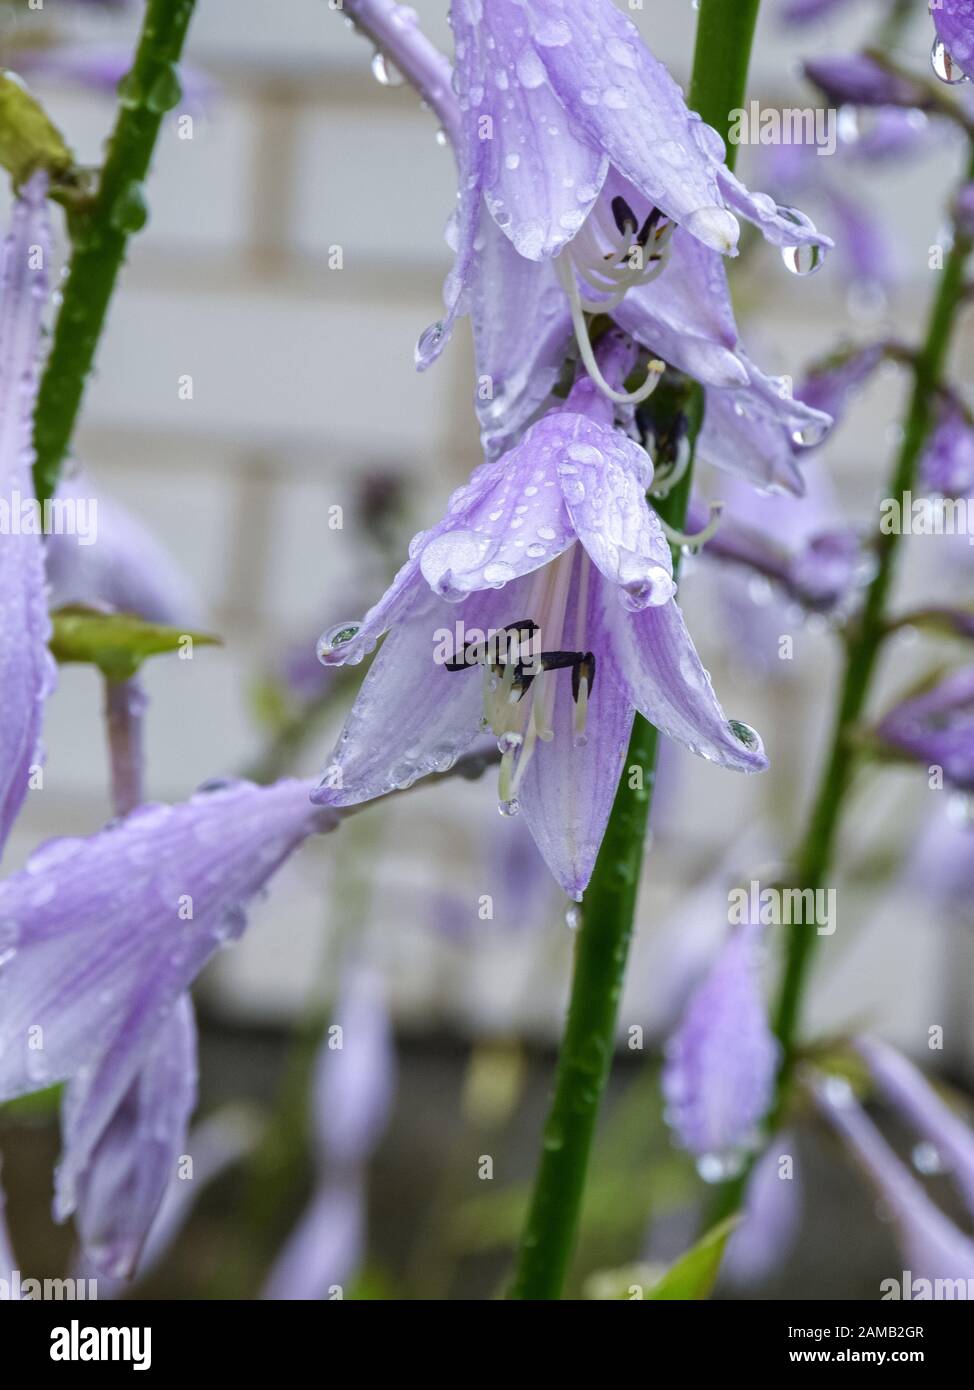 picture of plants after rain, dew drops, close-up view Stock Photo